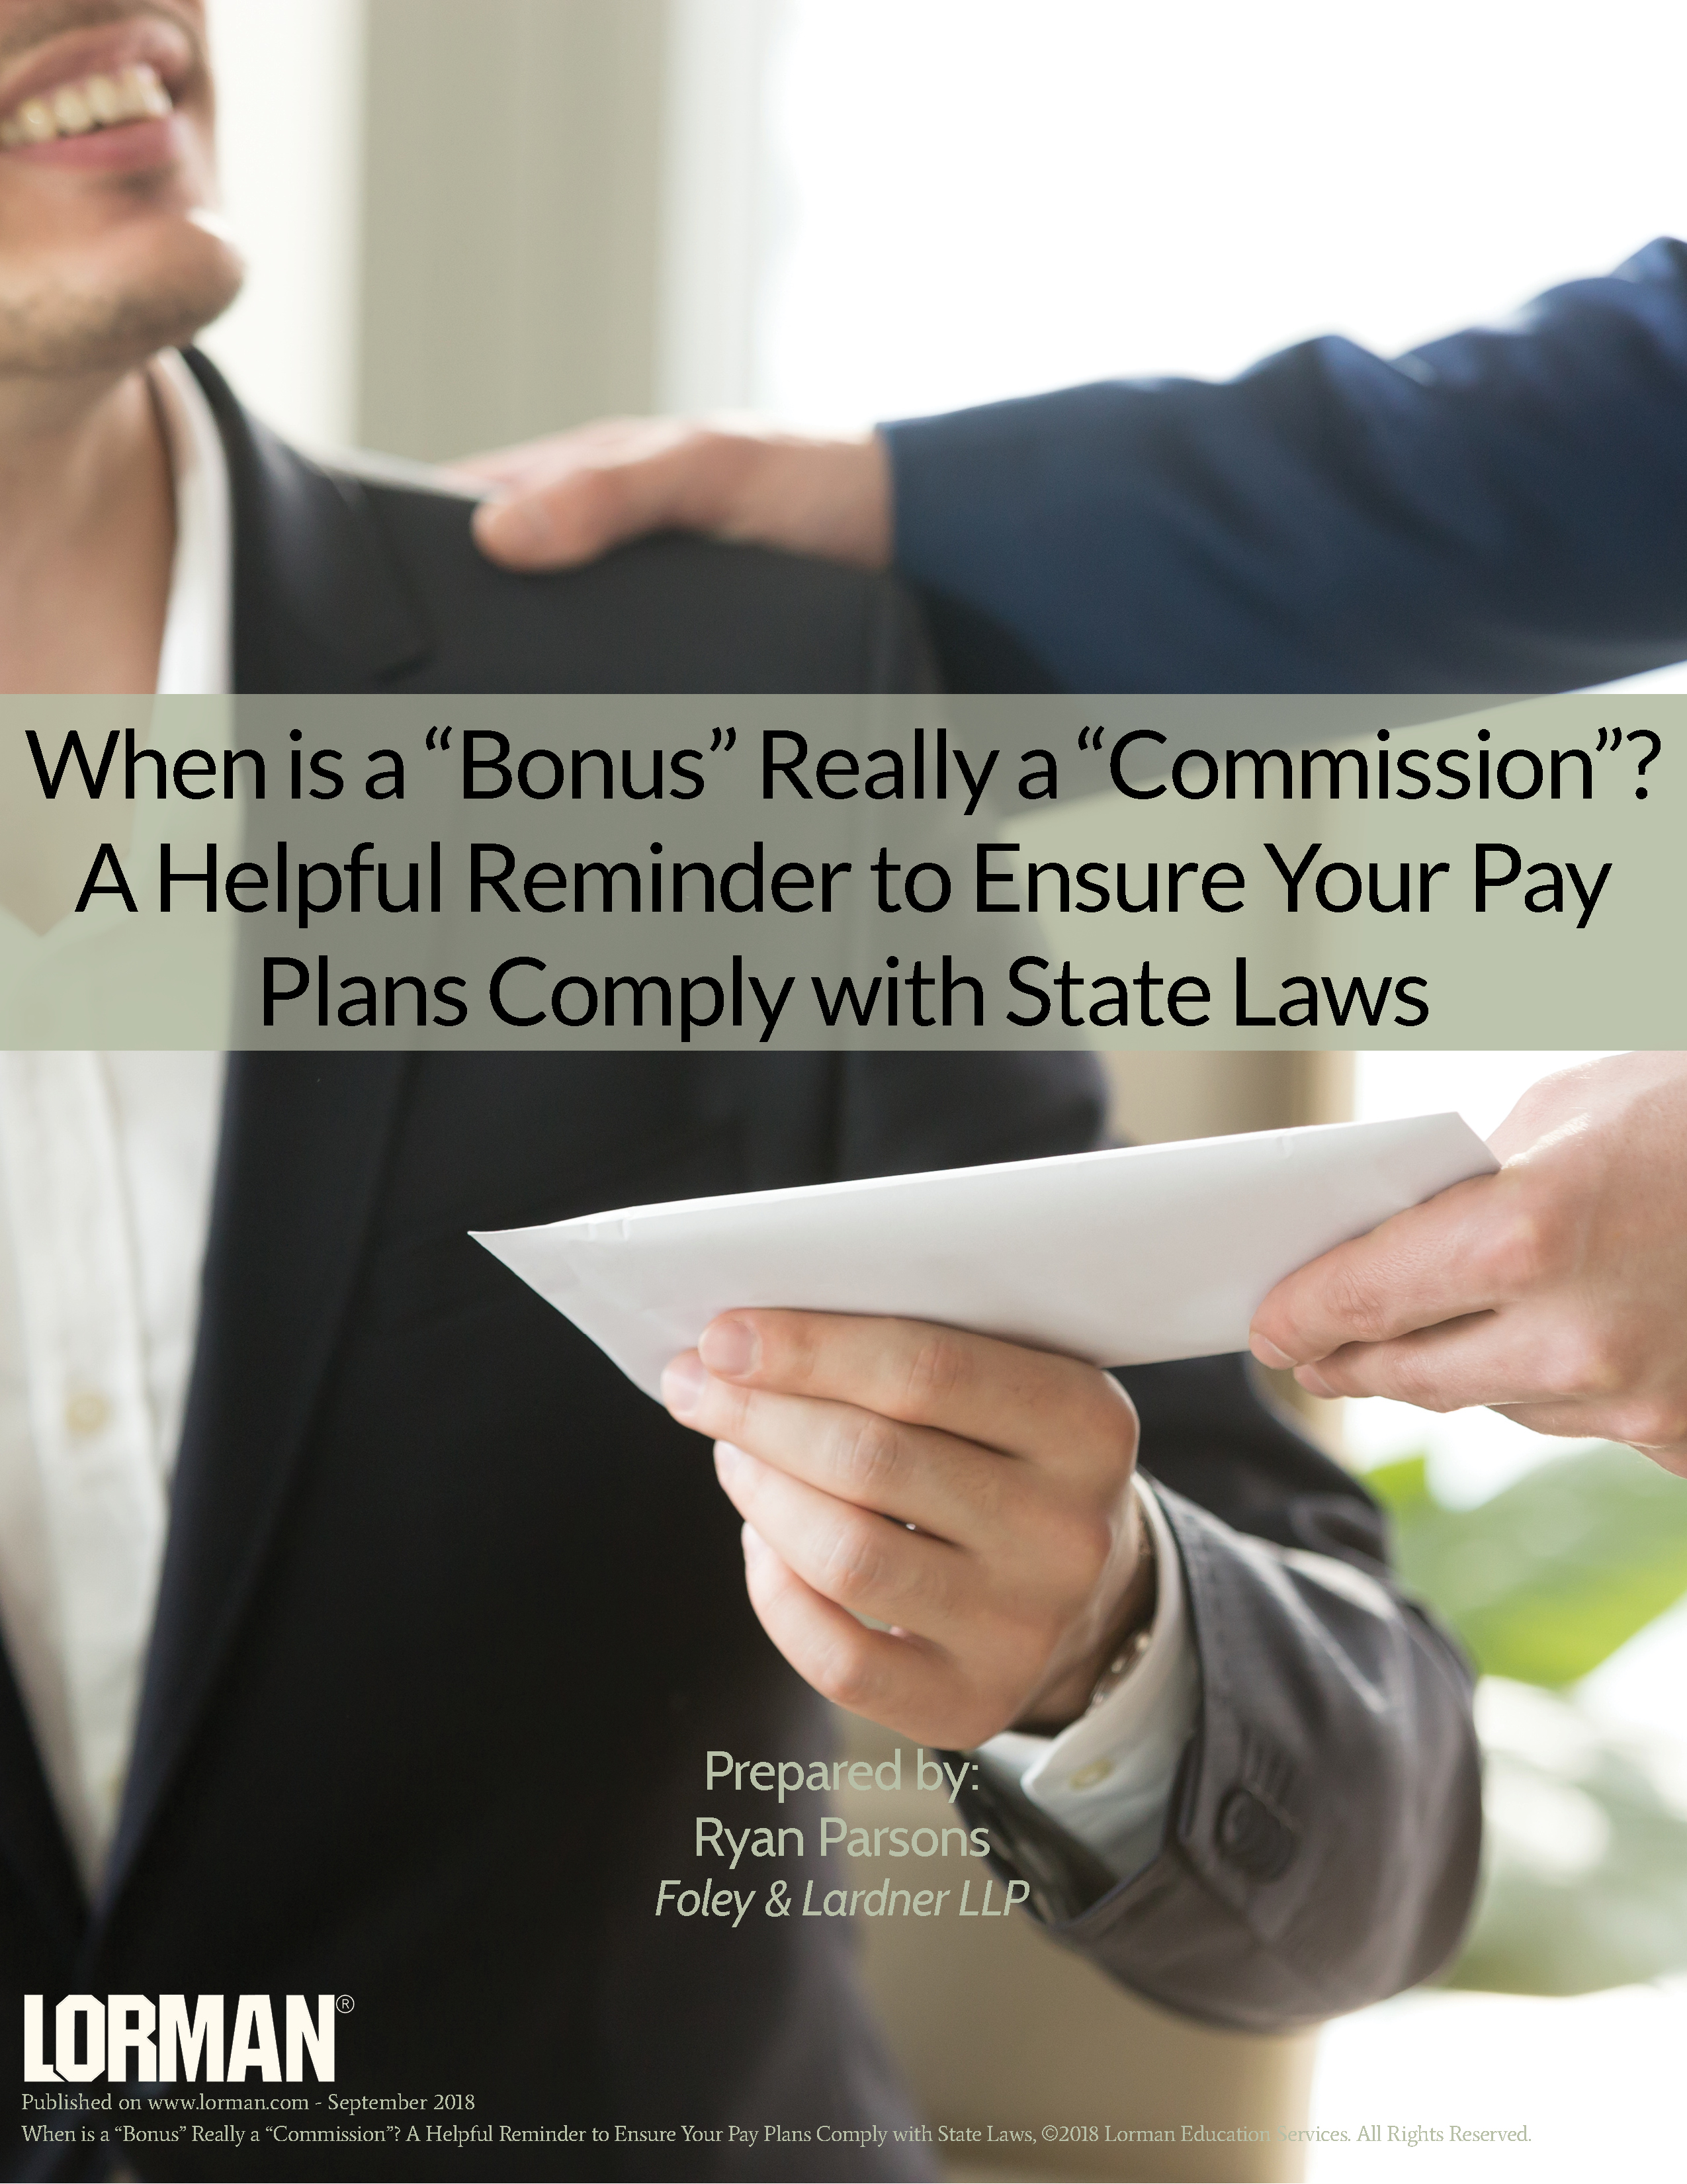 When is a “Bonus” Really a “Commission”?